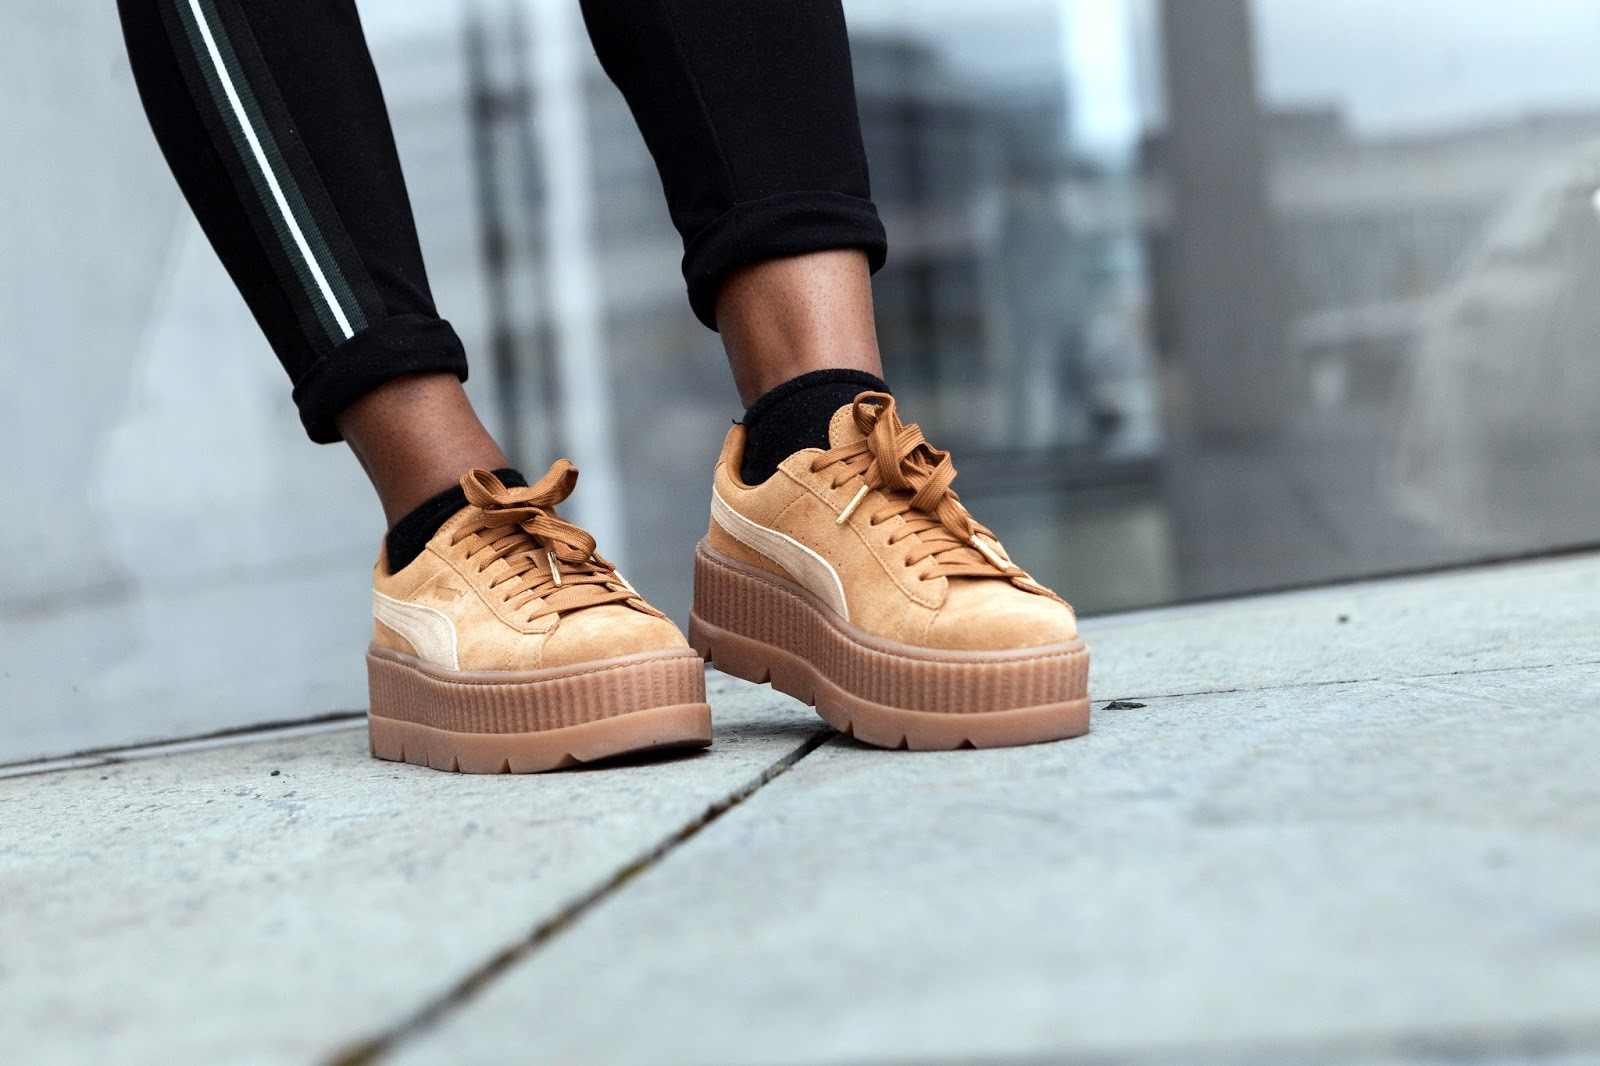 puma creepers outfit